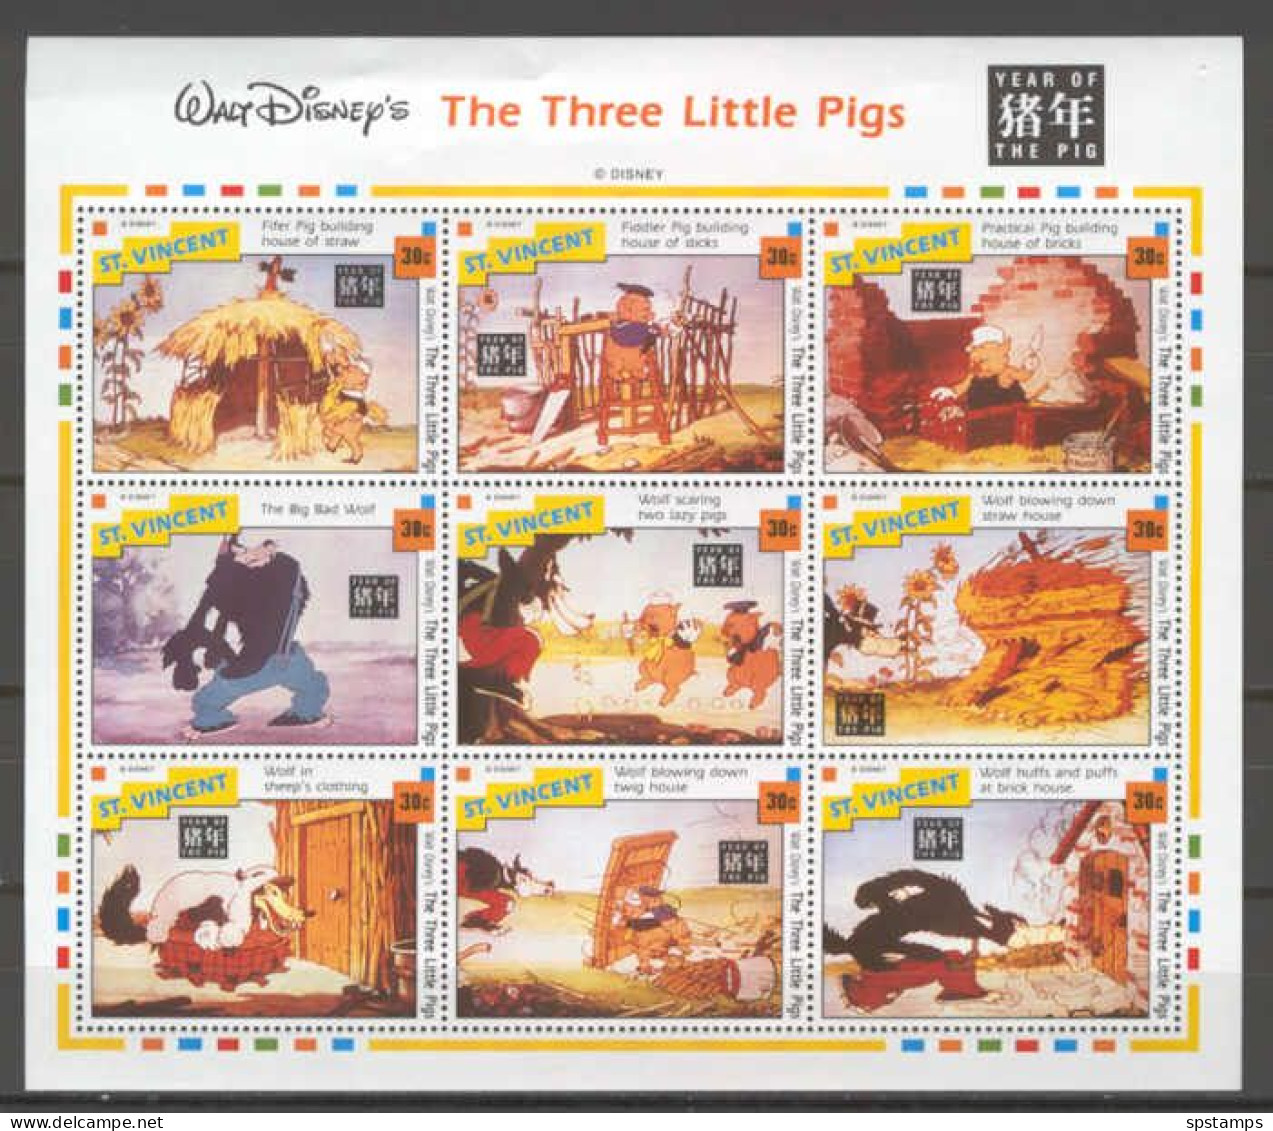 Disney St Vincent 1995 The Three Little Pigs - Year Of The Pig Sheetlet MNH - Disney